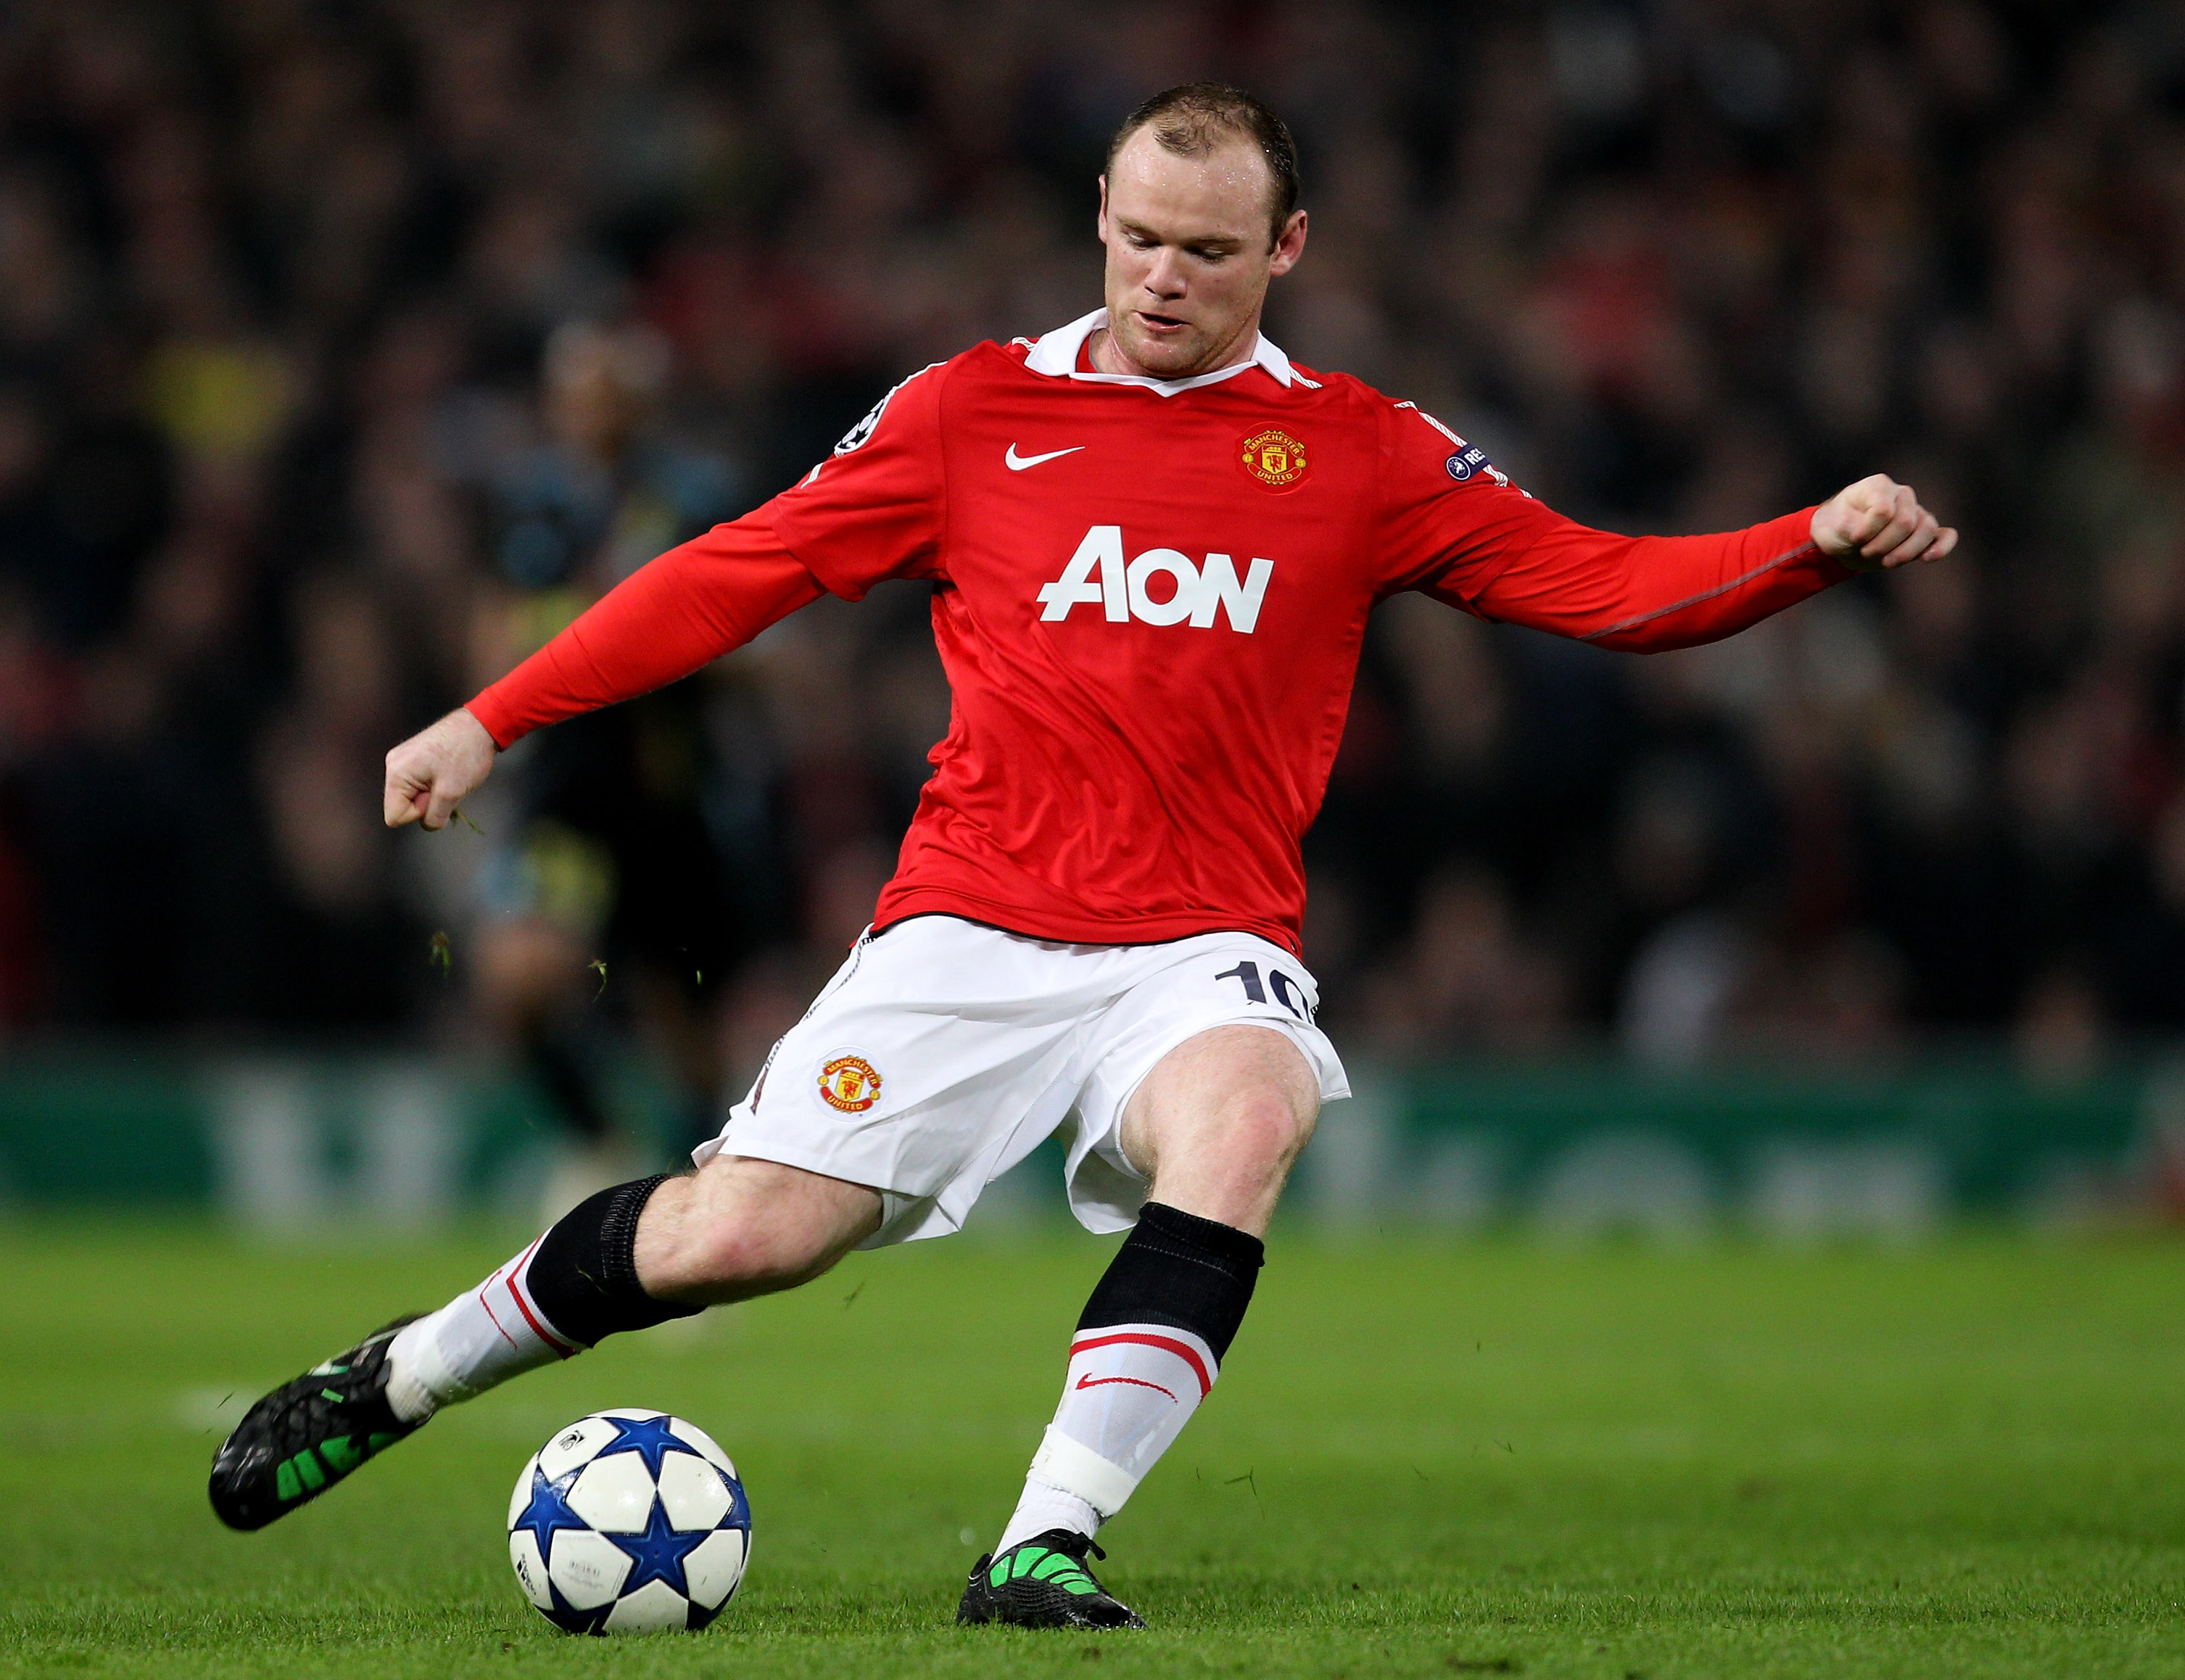 MANCHESTER, ENGLAND - MARCH 15:  Wayne Rooney of Manchester United in action during the UEFA Champions League round of 16 second leg match between Manchester United and Marseille at Old Trafford on March 15, 2011 in Manchester, England.  (Photo by Alex Li